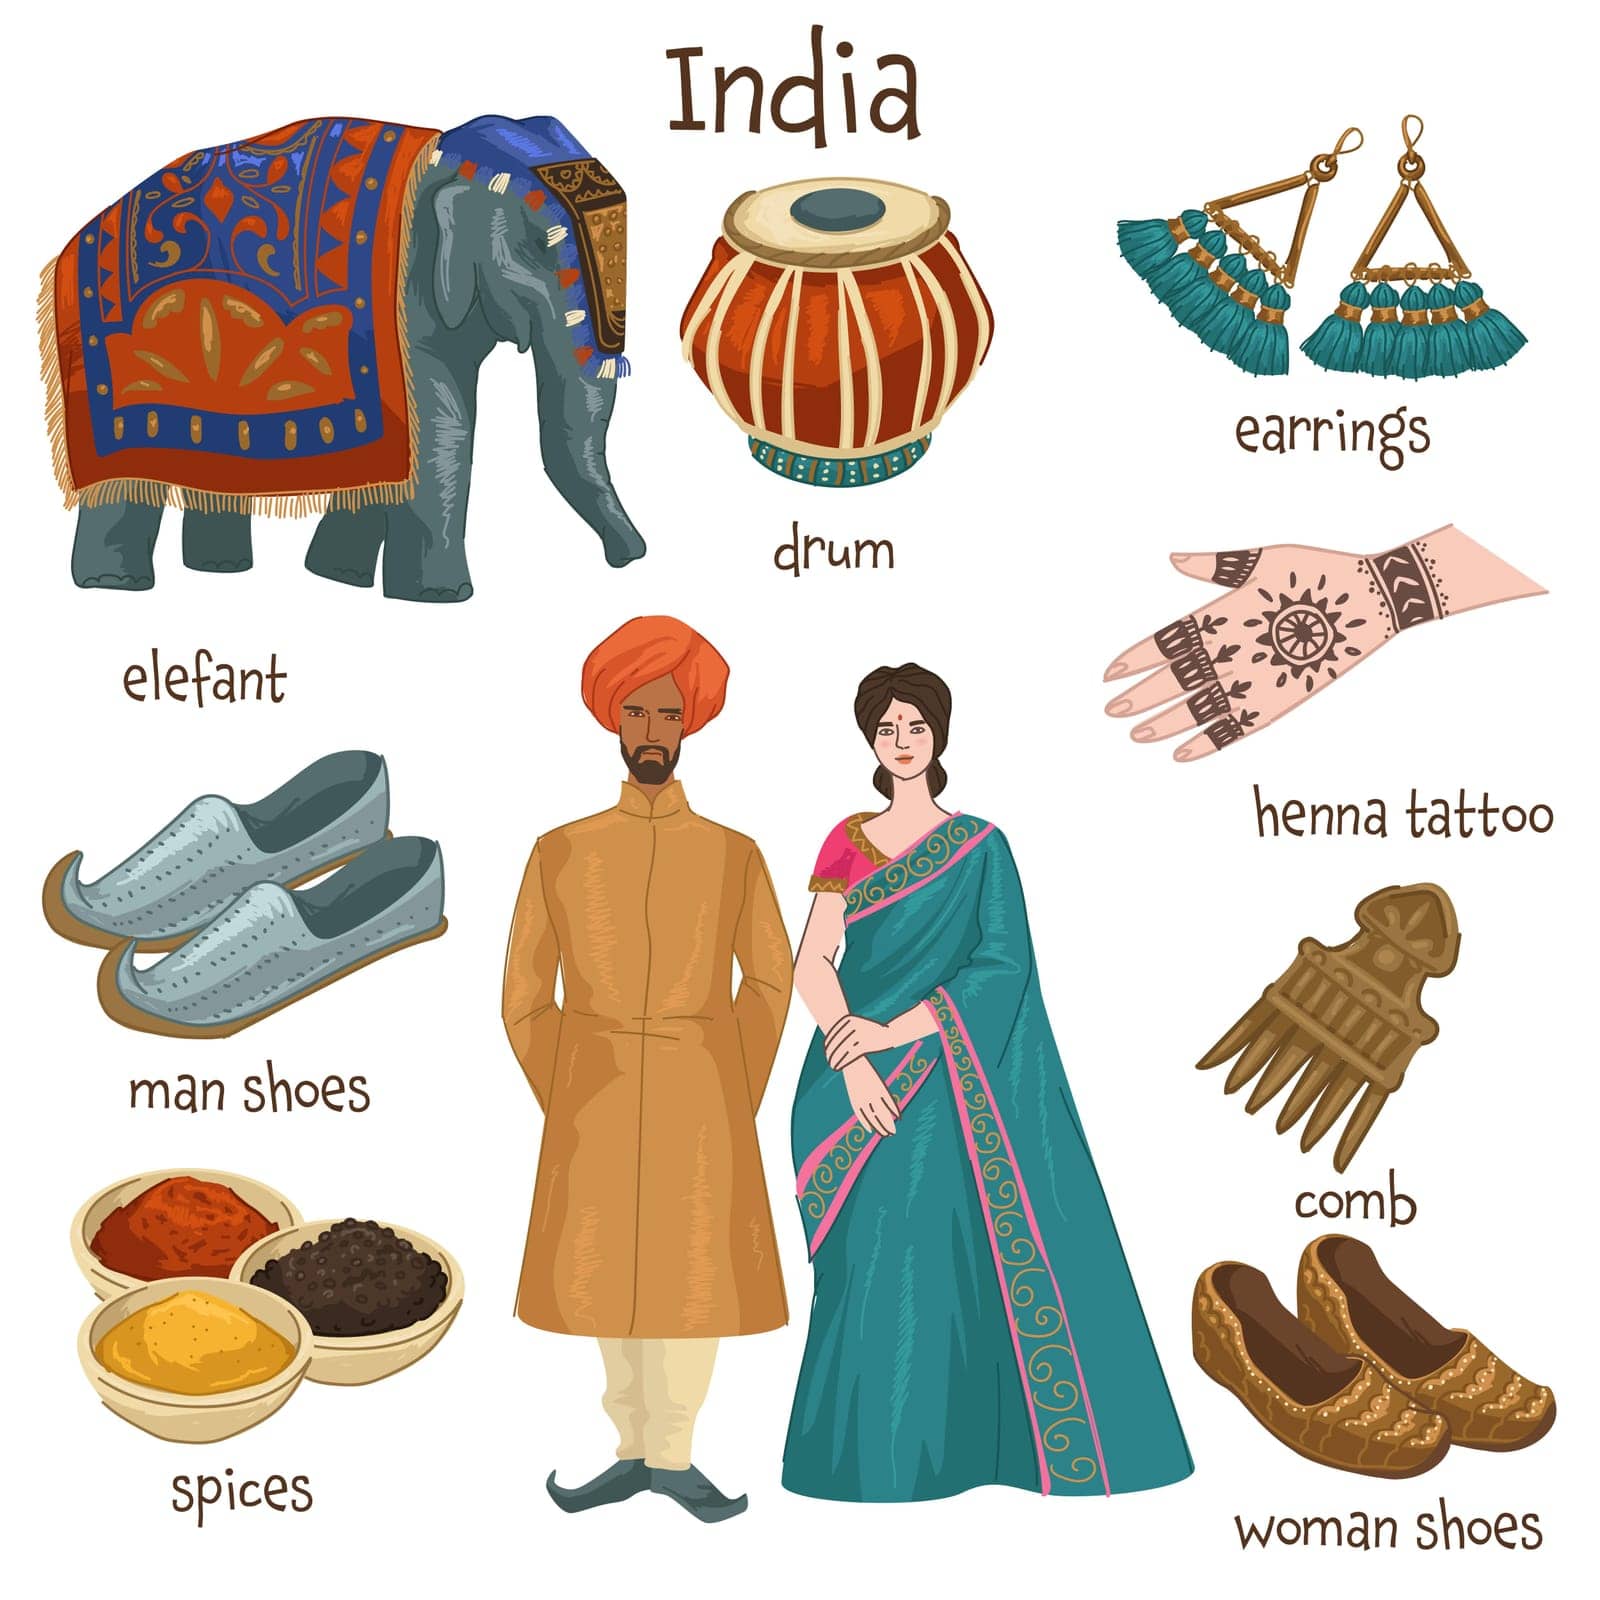 Culture and traditions of india, man and woman wearing traditional clothes and shoes. Indian drums and jewelry, earring and comb. Spices and henna tattoo design, elephant. Vector in flat style